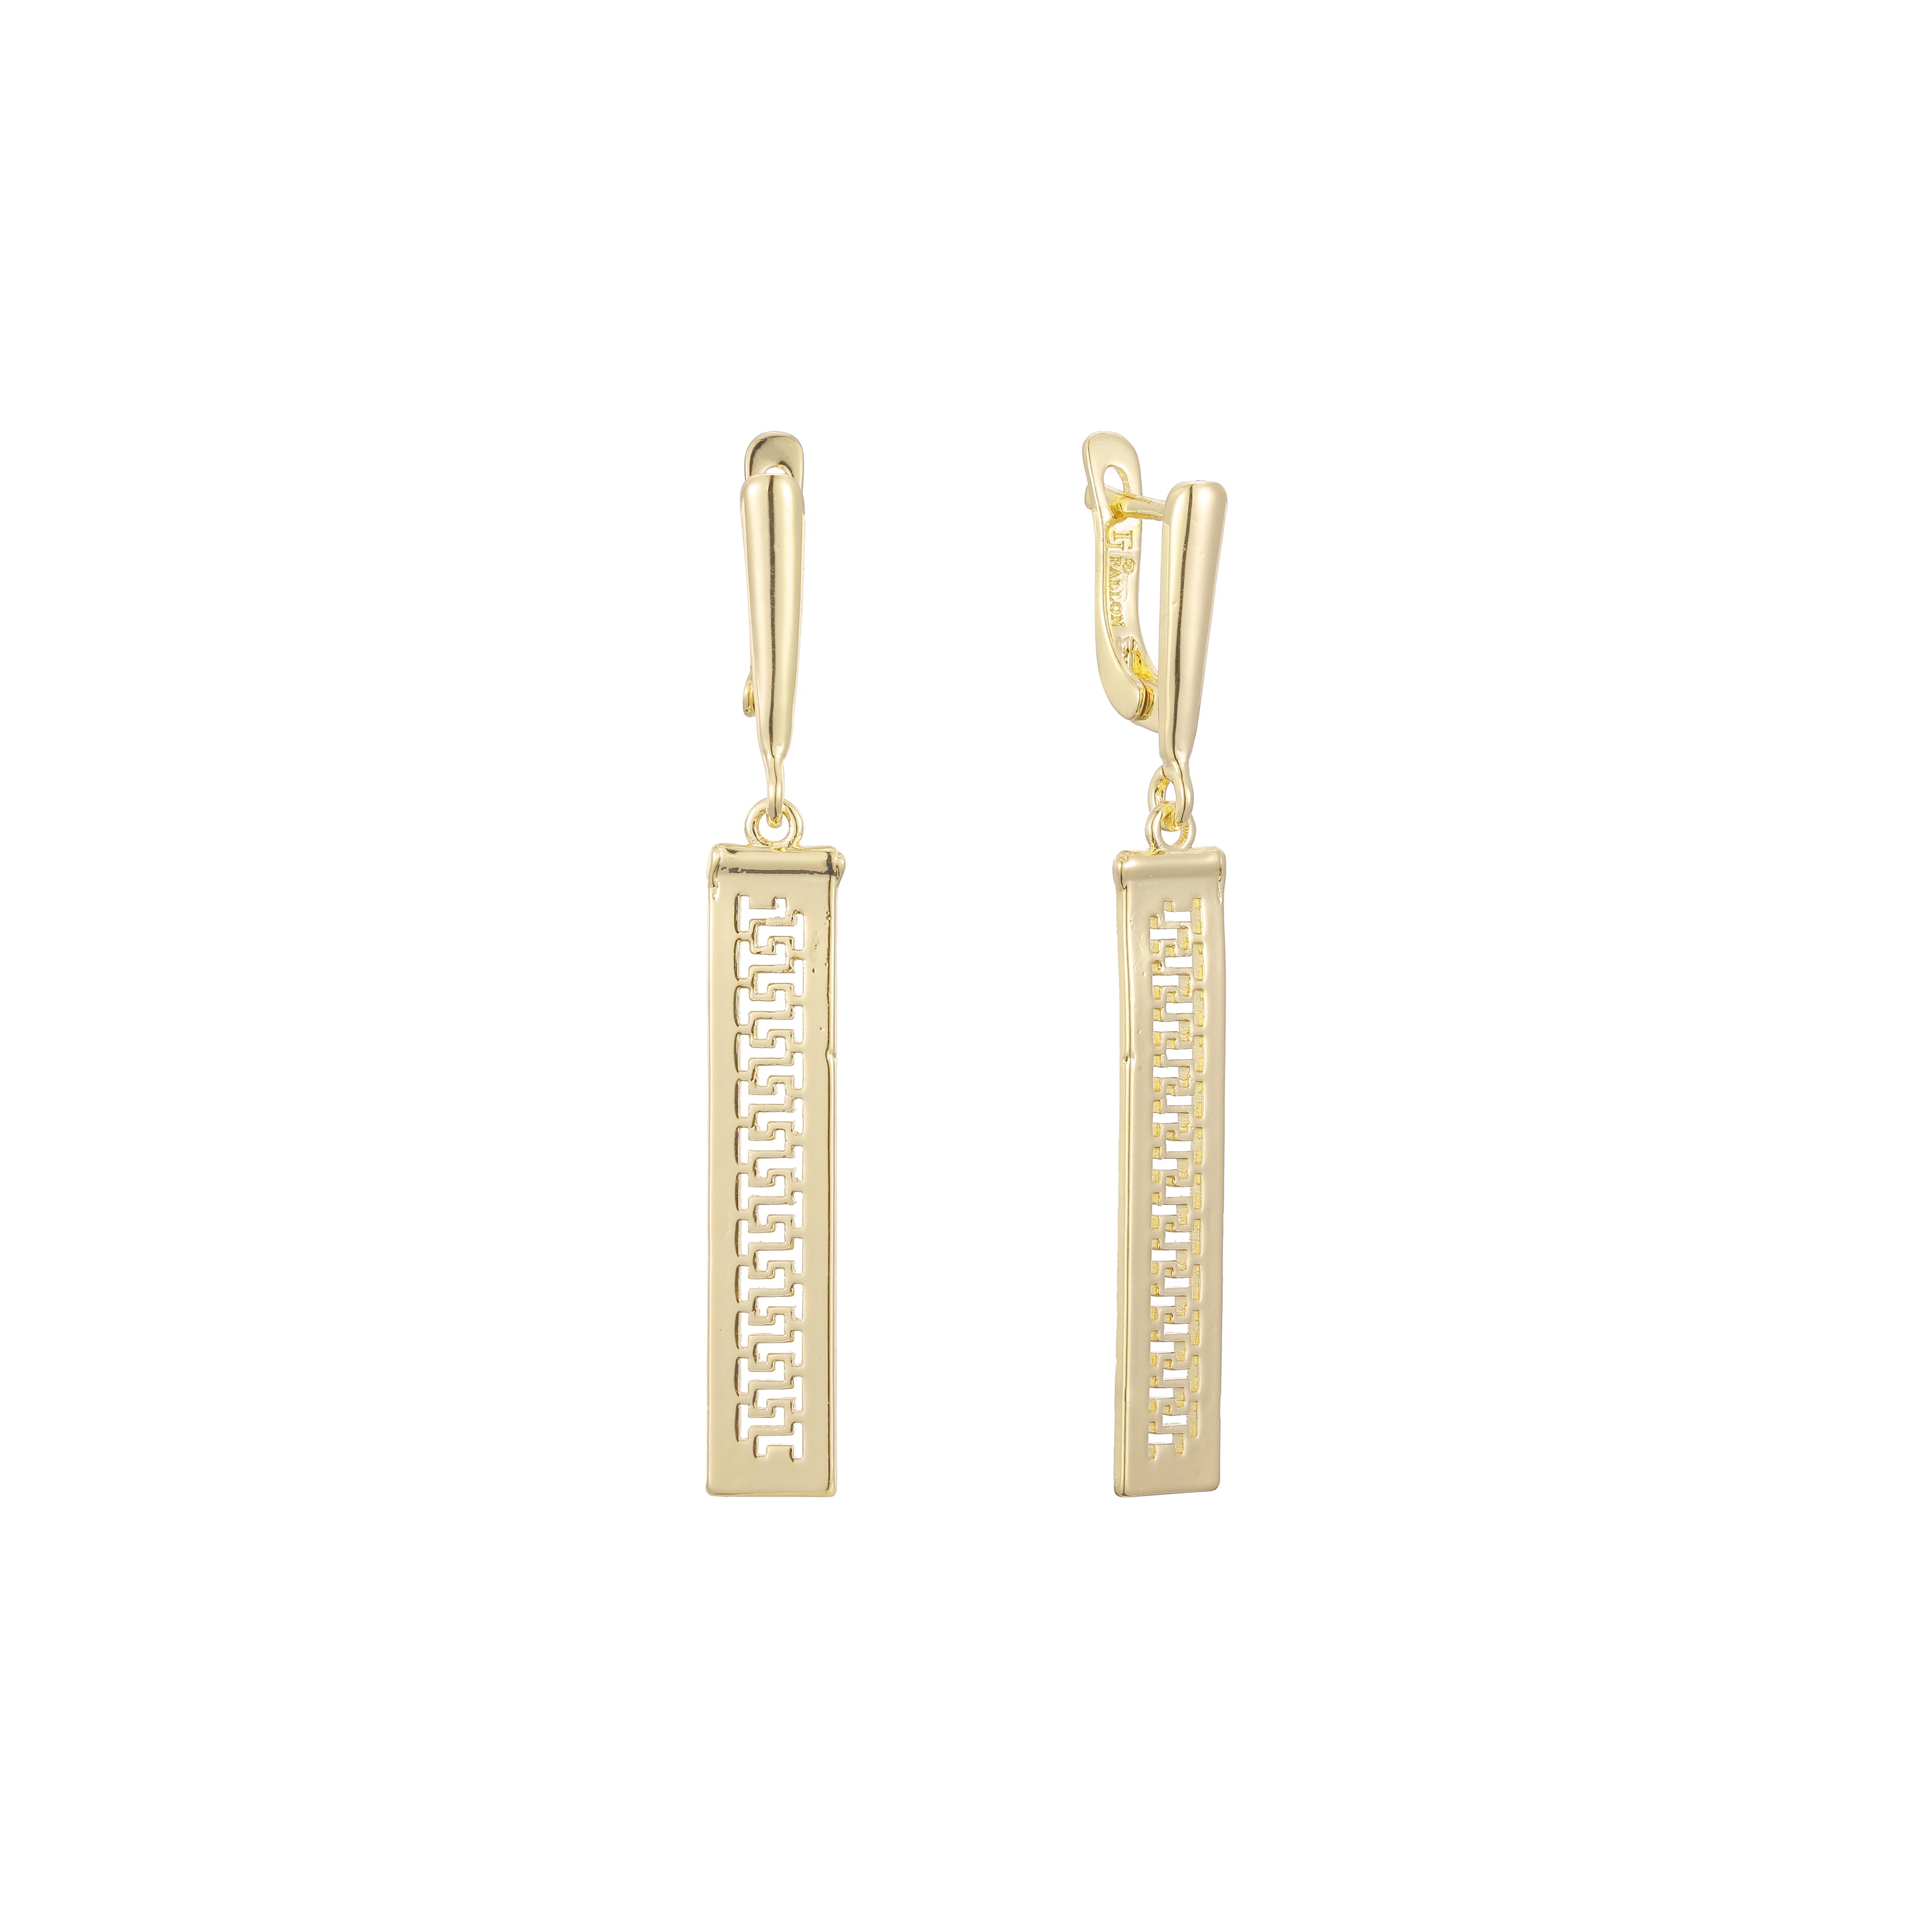 Tall earrings in 14K Gold, Rose Gold plating colors